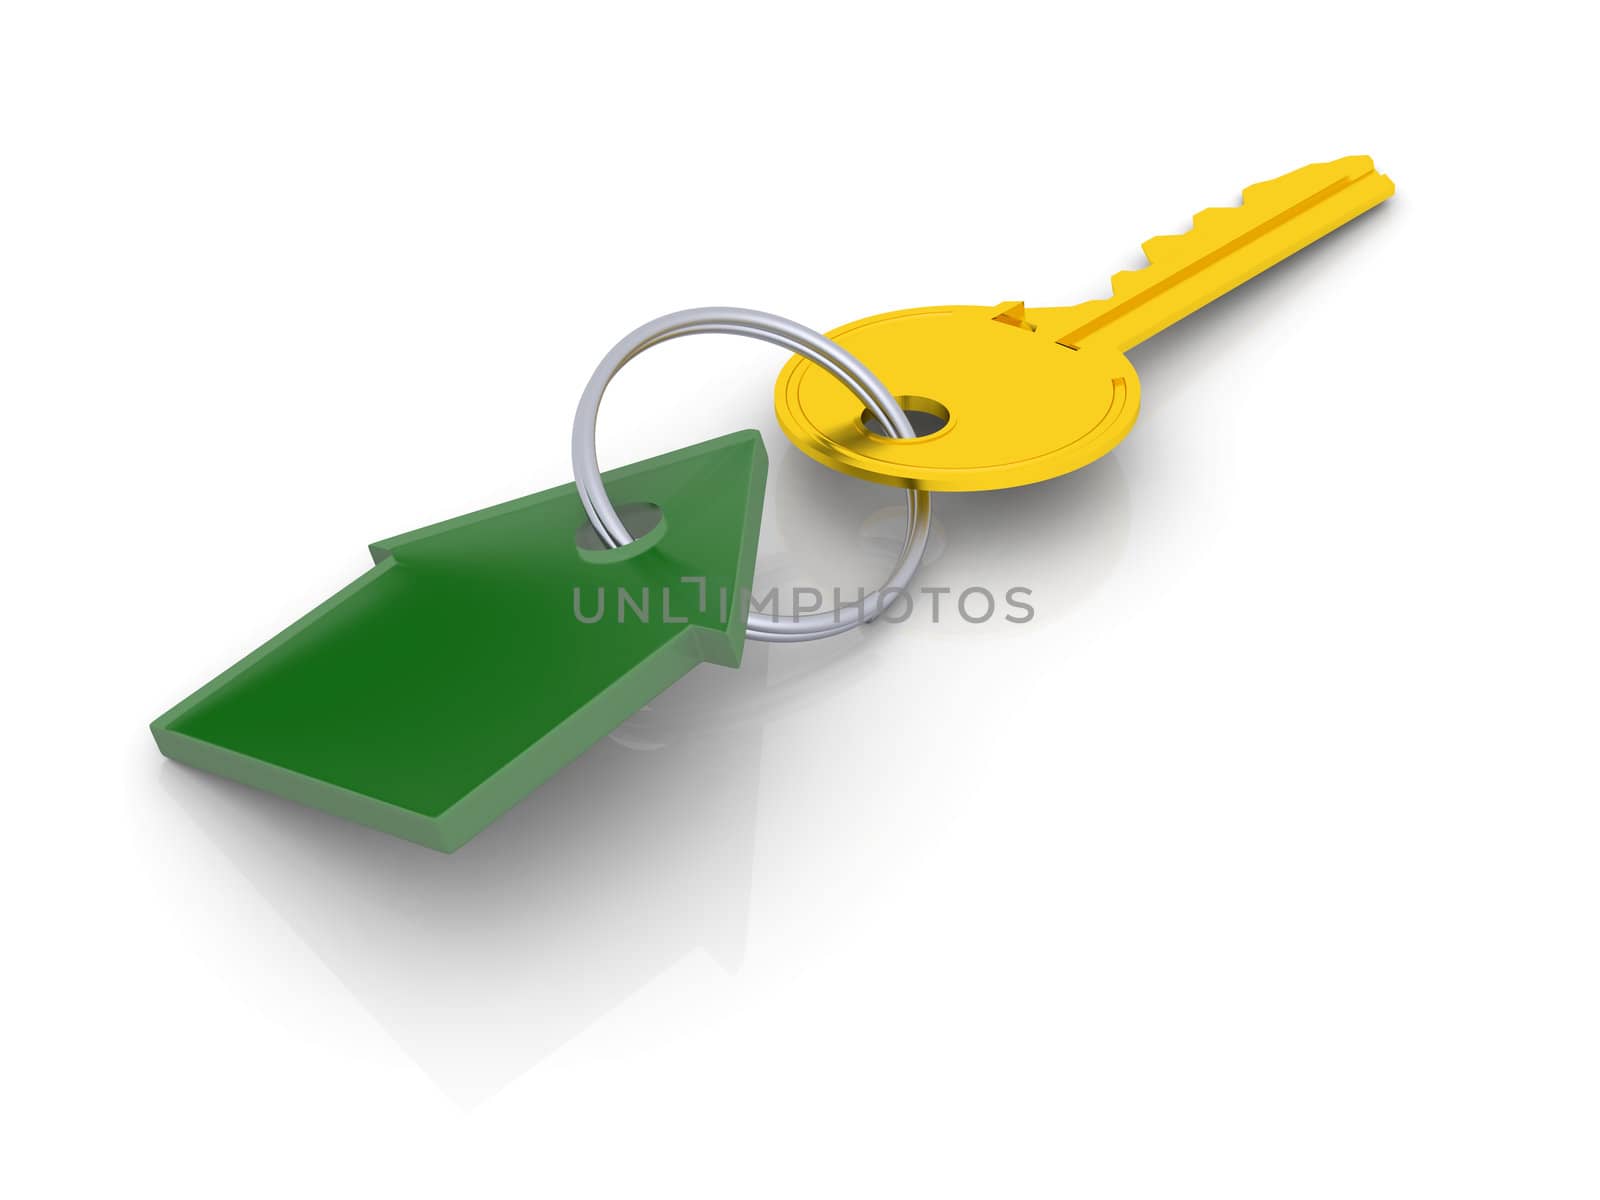 Golden key with green tag in shape of house